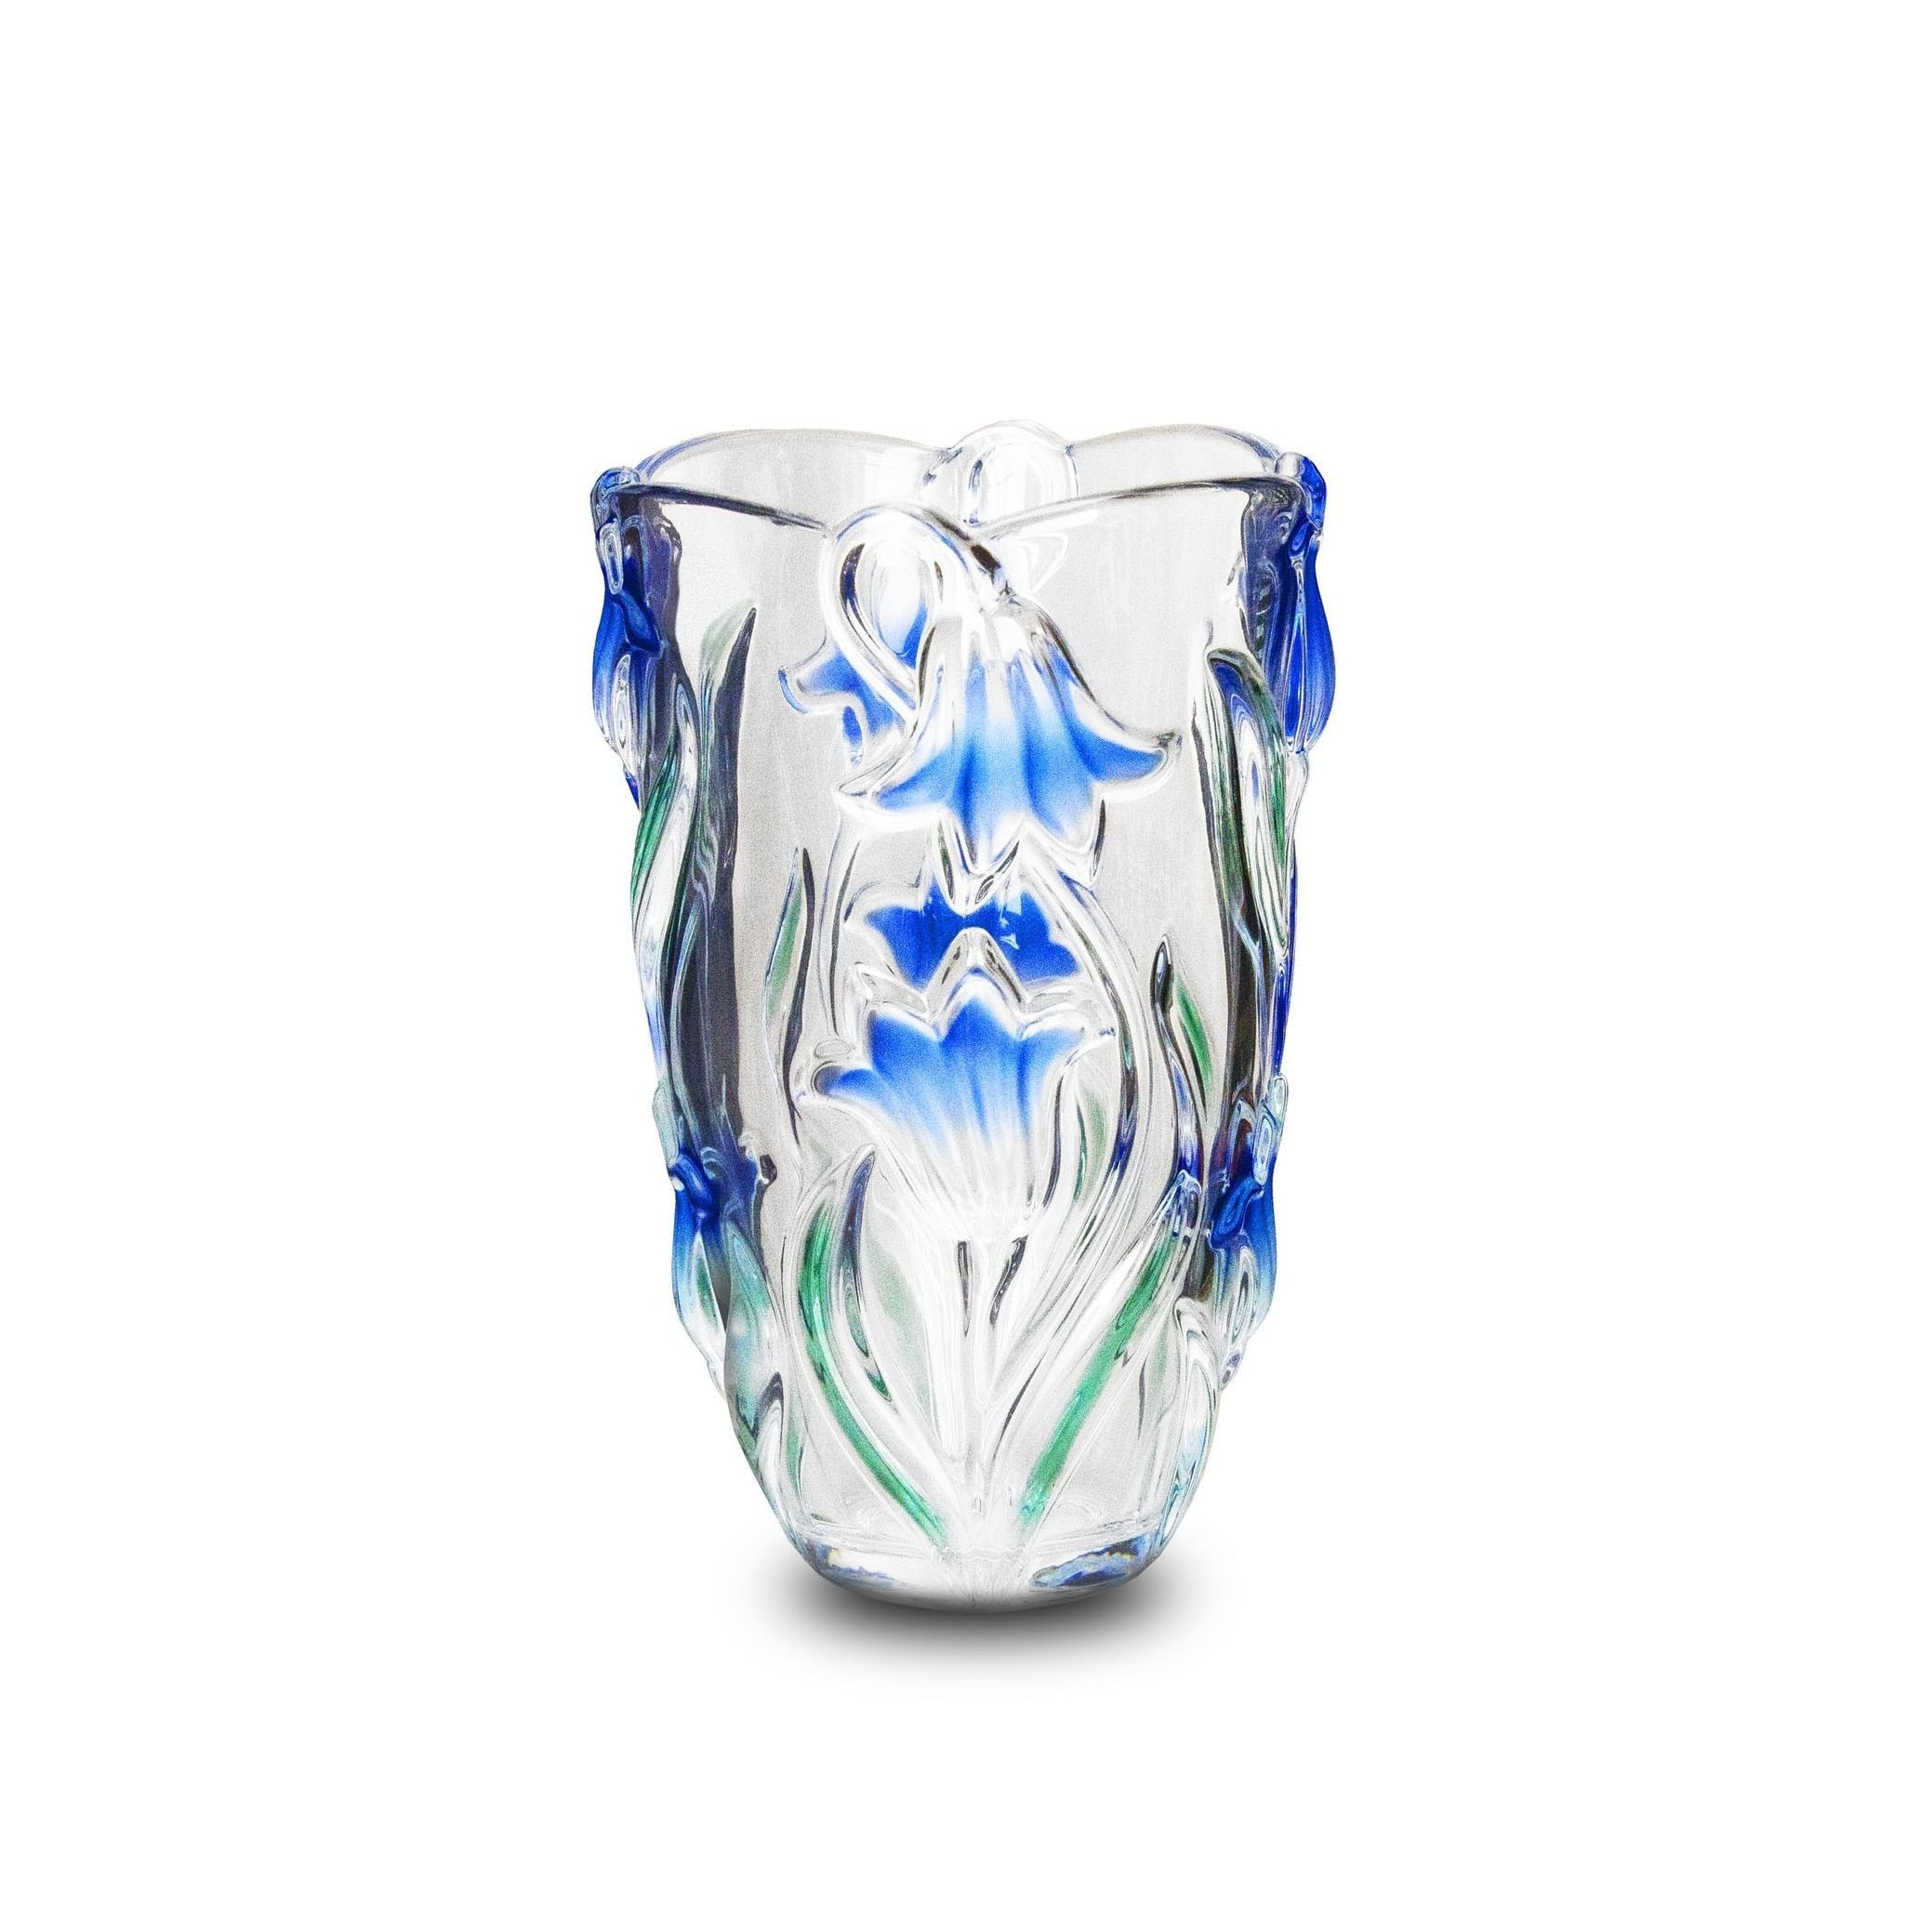 20 Awesome Lenox China Vase 2024 free download lenox china vase of 21 crystal glass vase the weekly world within studio silversmiths blue danube collection crystal vase